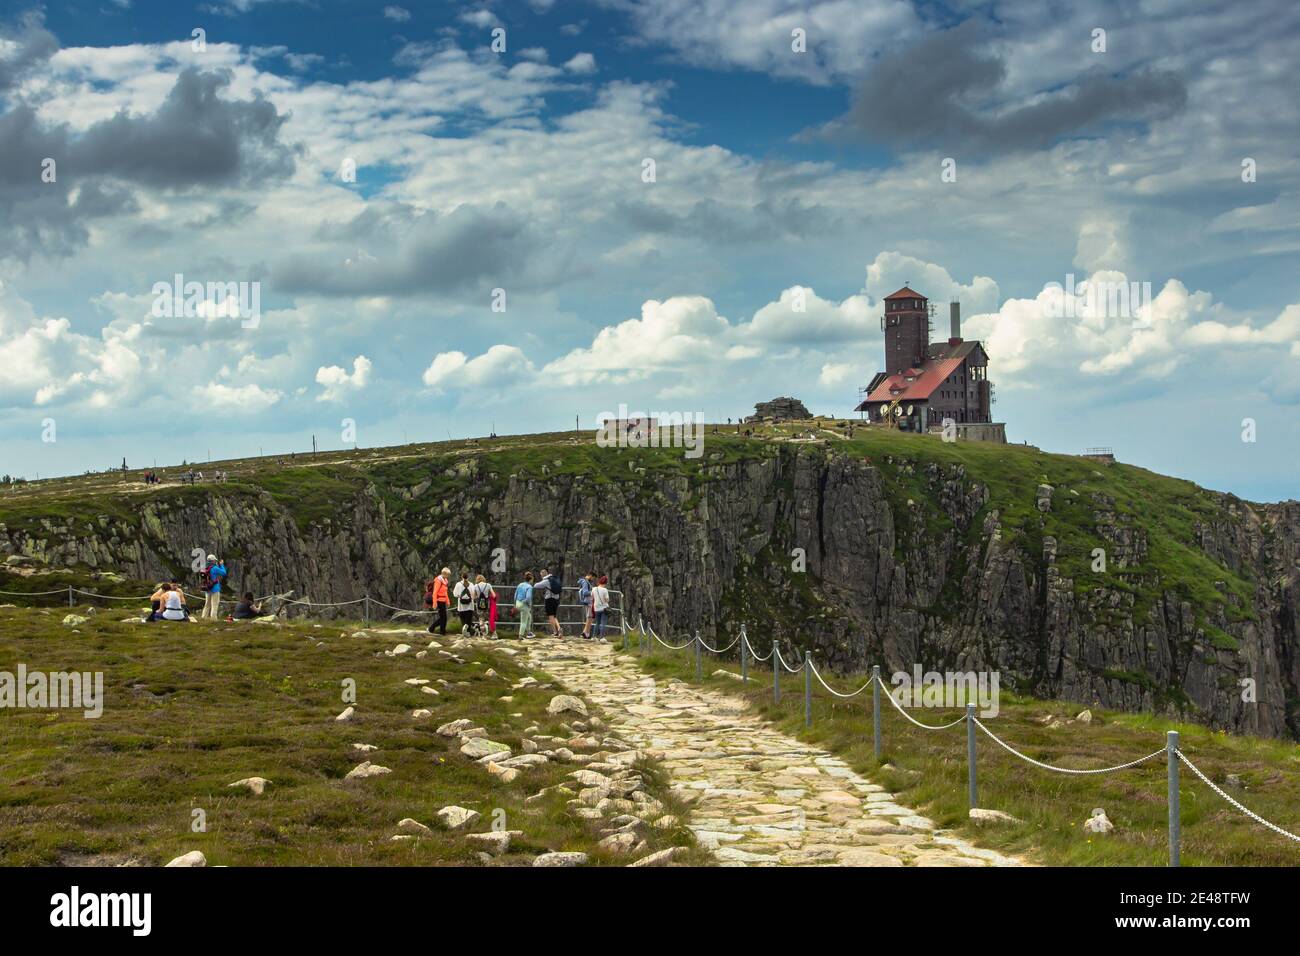 Snezne jamy,Czech Republic-July 25,2020. A remoted building on Polish-Czech border in Krkonose Giant mountains.People hiking and enjoying the views.We Stock Photo